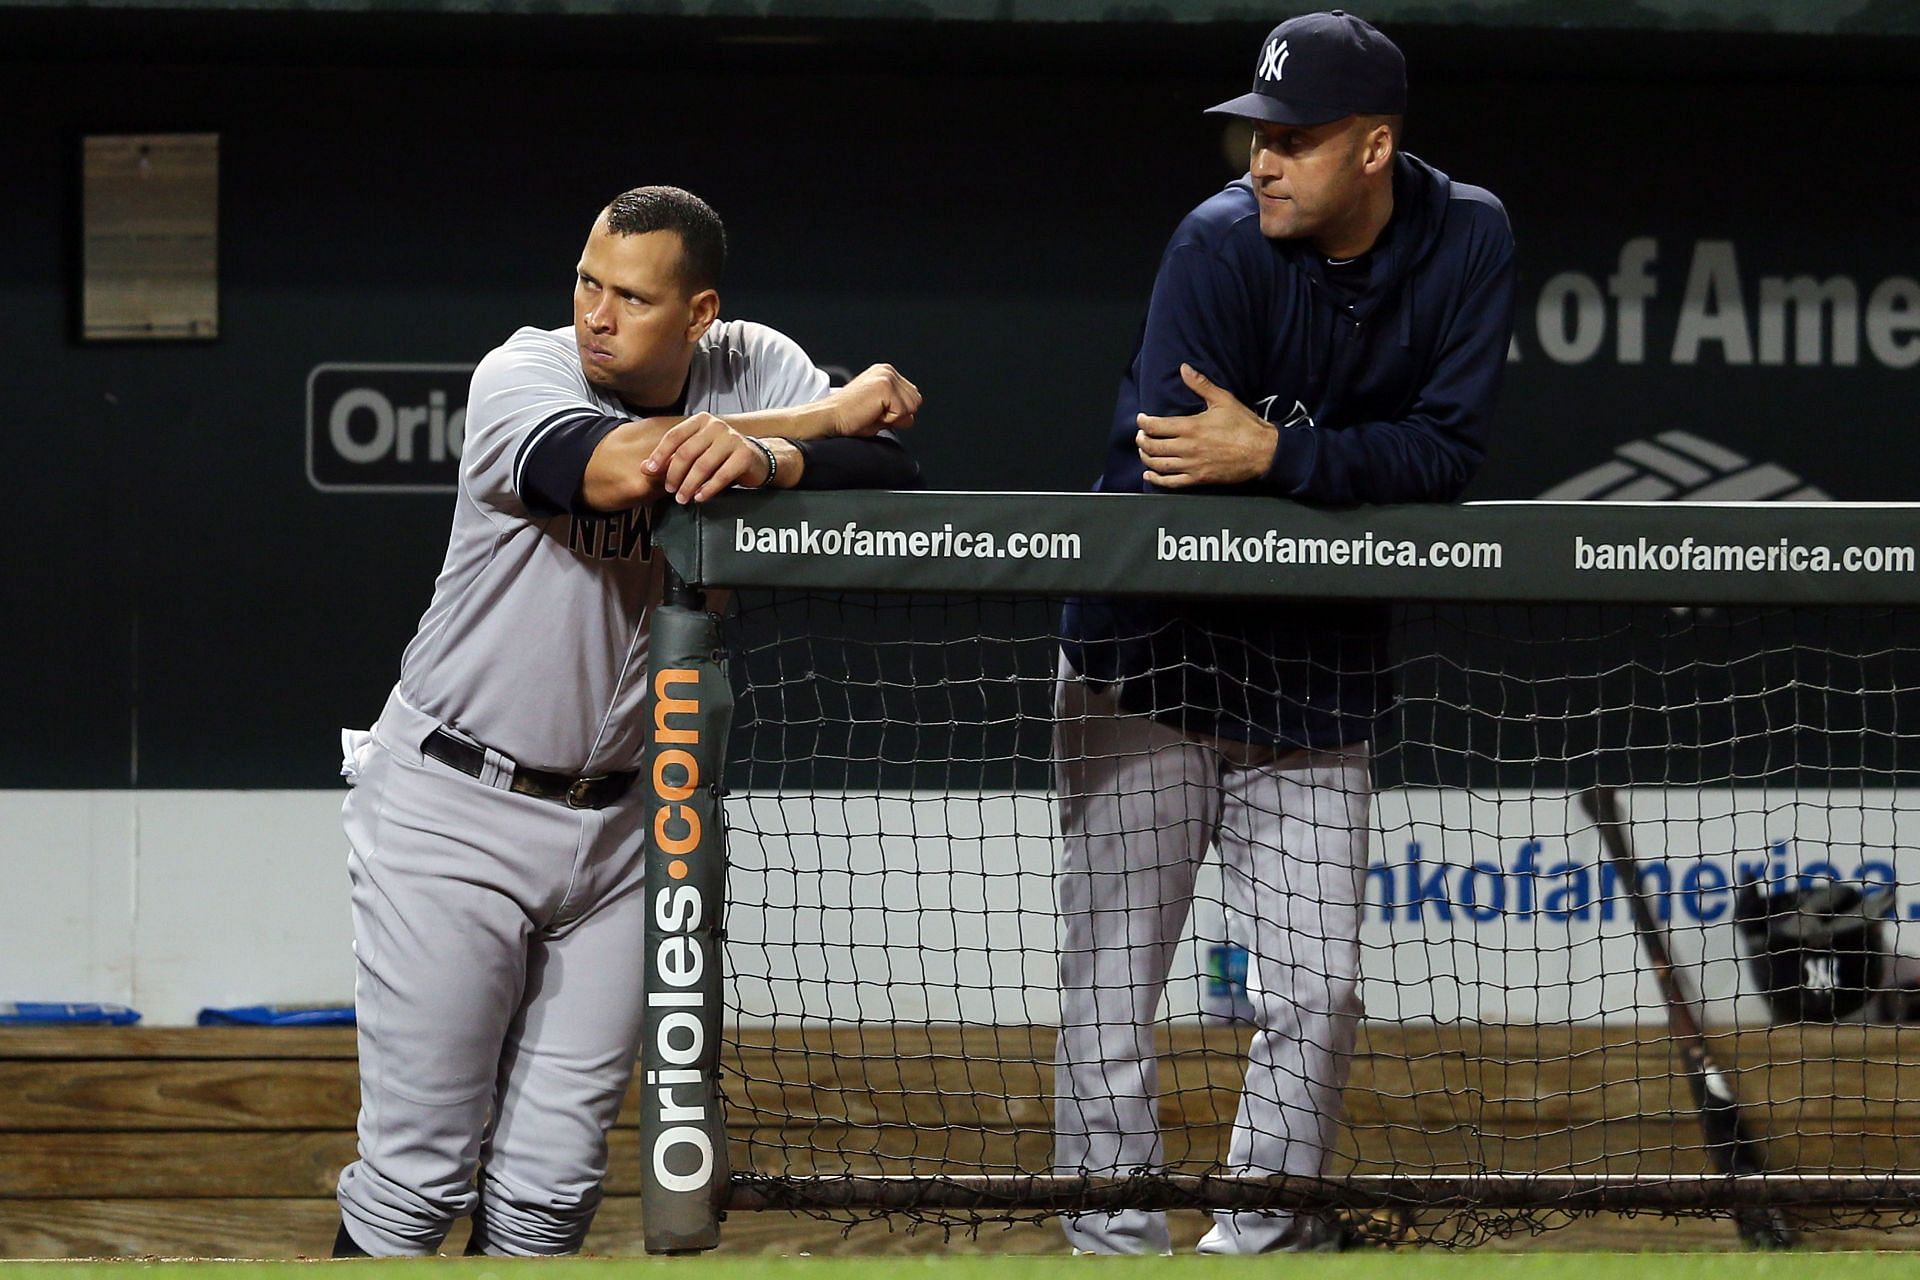 Alex Rodriguez made some demeaning comments toward Derek Jeter in the media. It made everything go awry.